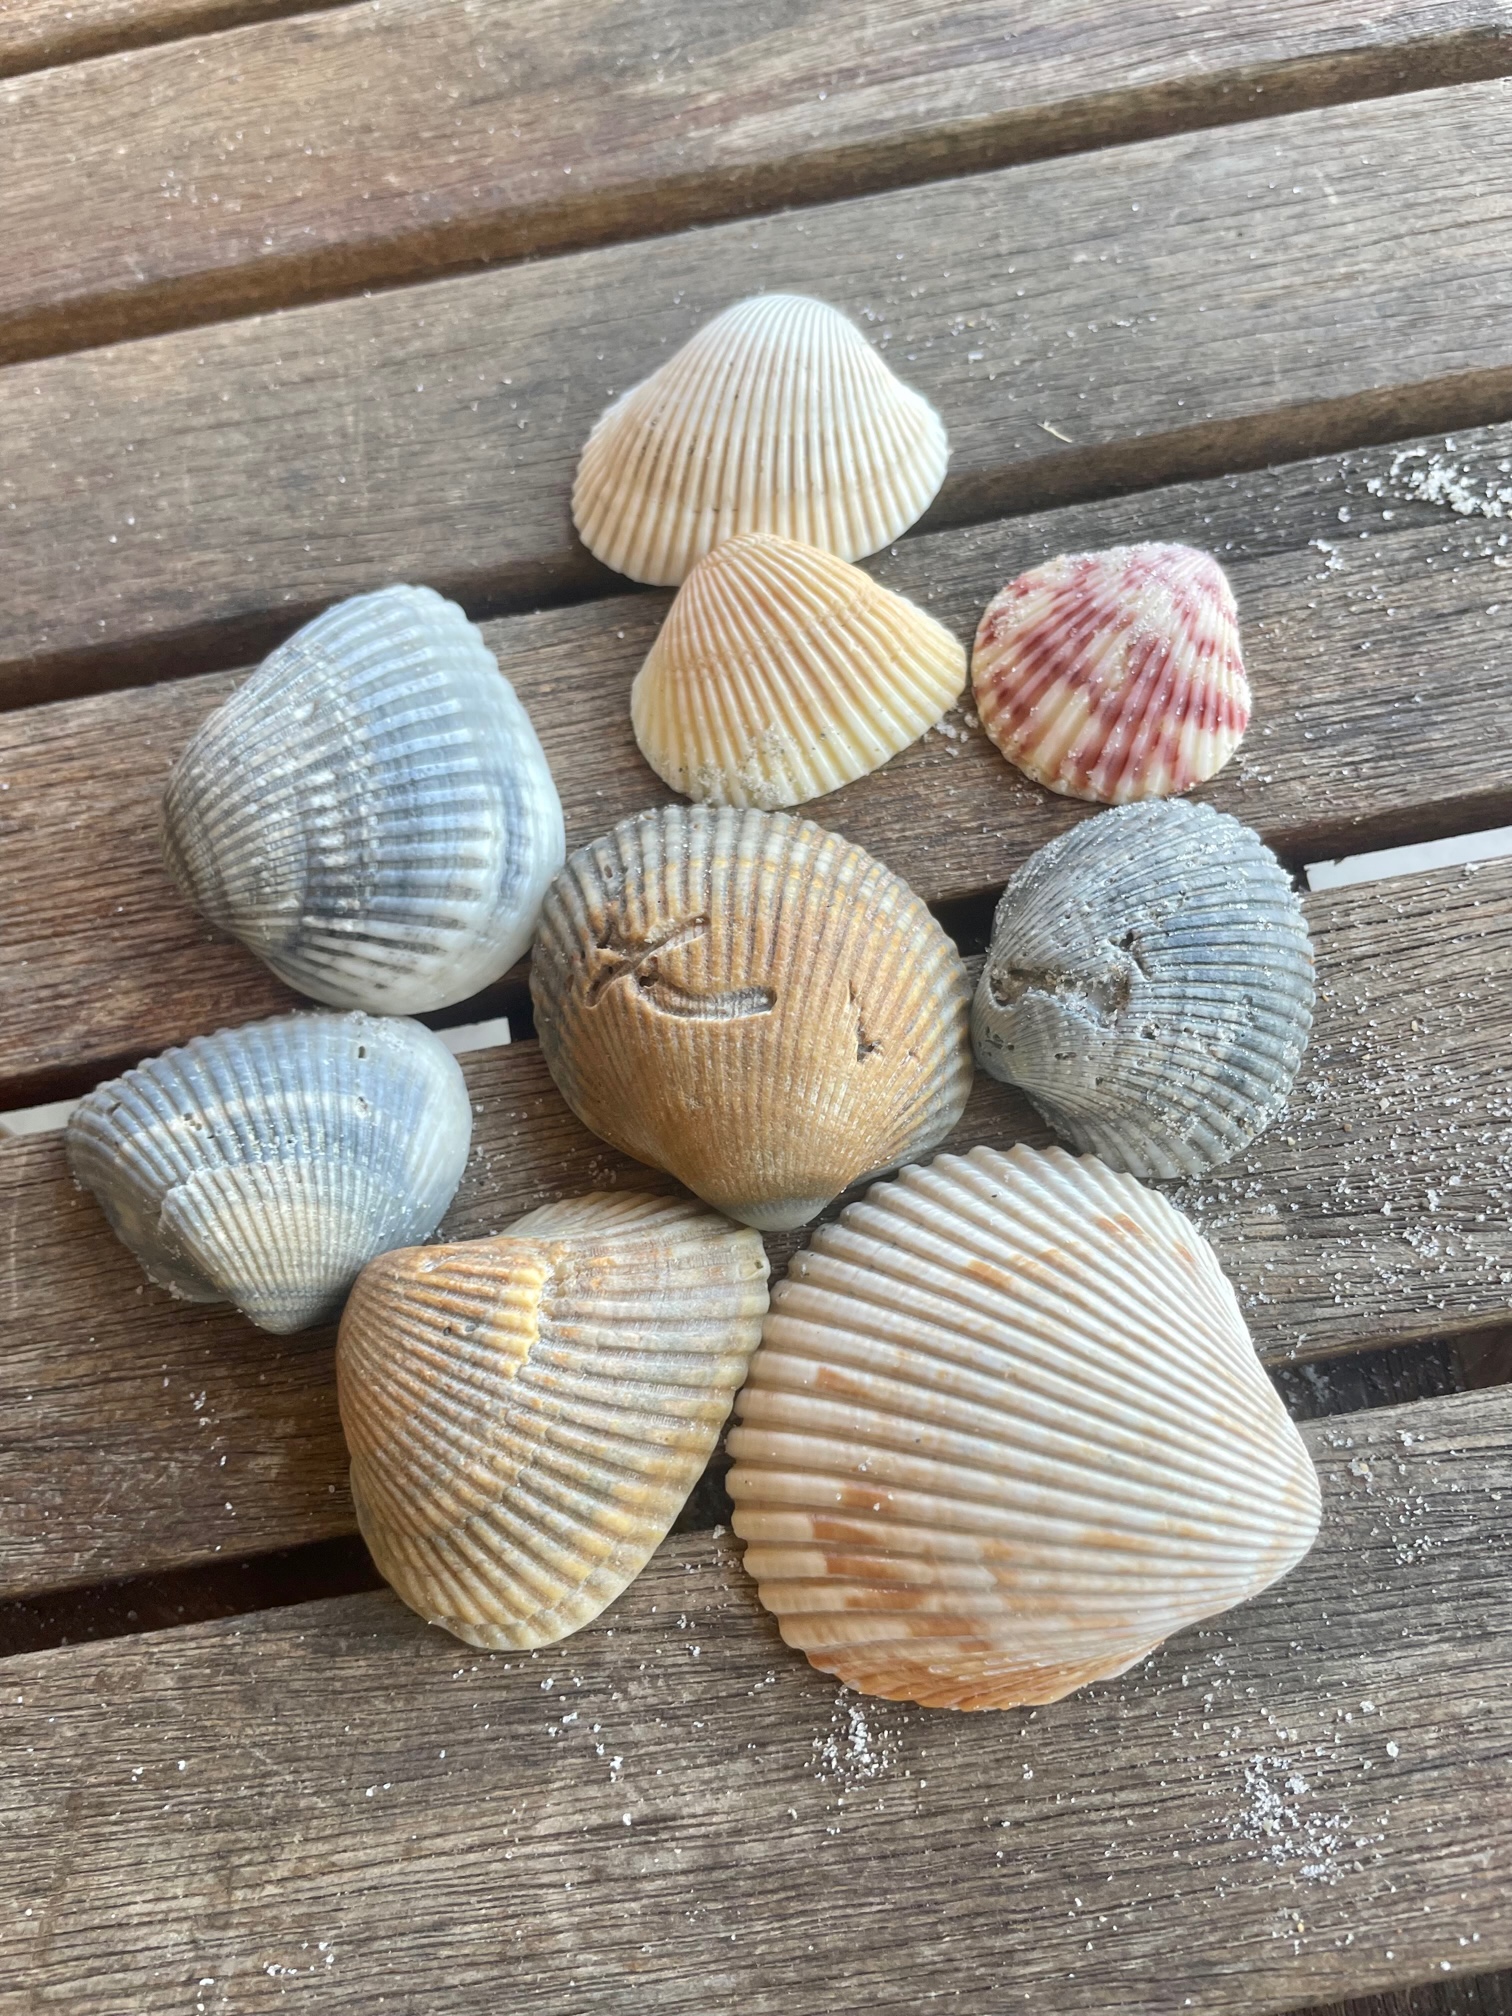 A Walk on the Beach in Search of the Perfect Shell